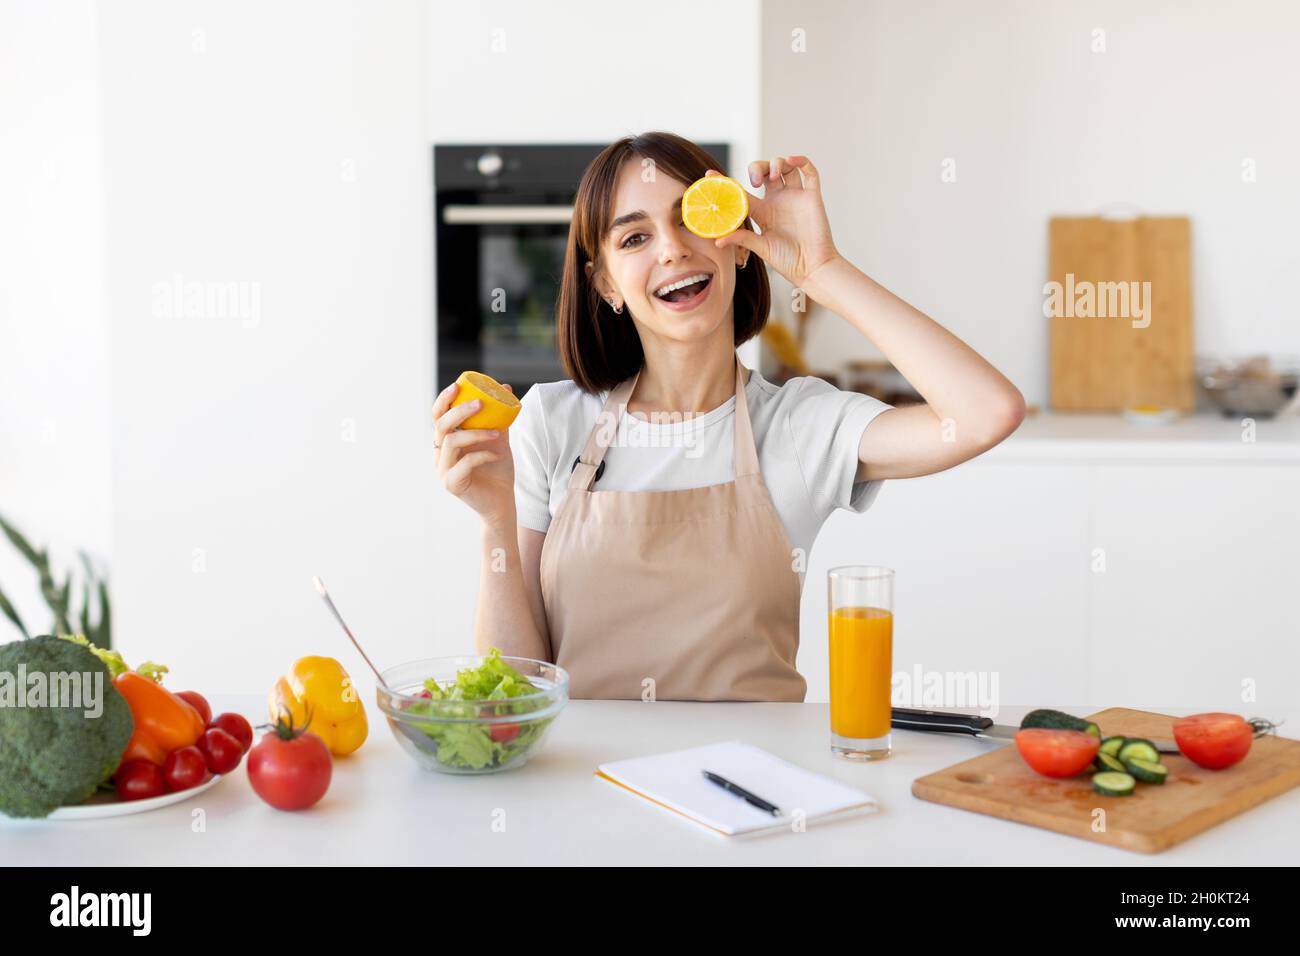 Playful young woman having fun and covering her eyes with lemon slices, fooling around in kitchen interior Stock Photo